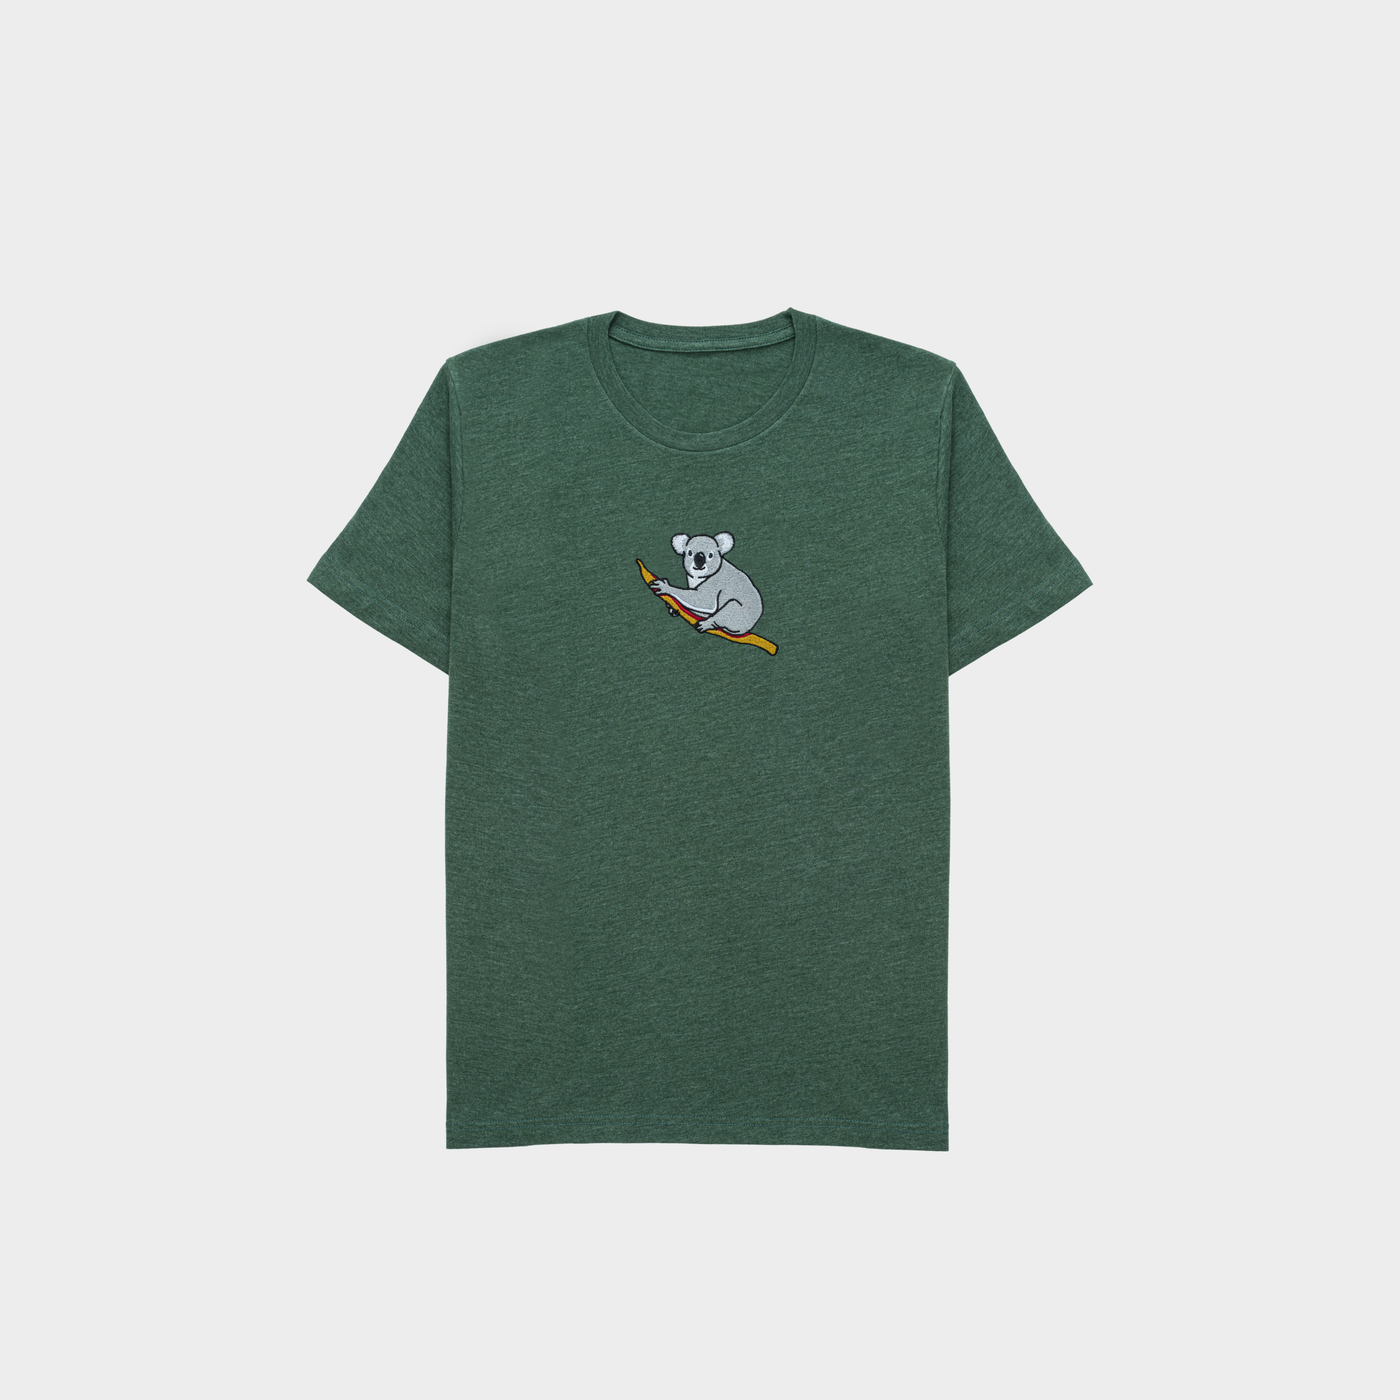 Bobby's Planet Kids Embroidered Koala T-Shirt from Australia Down Under Animals Collection in Heather Forest Color#color_heather-forest